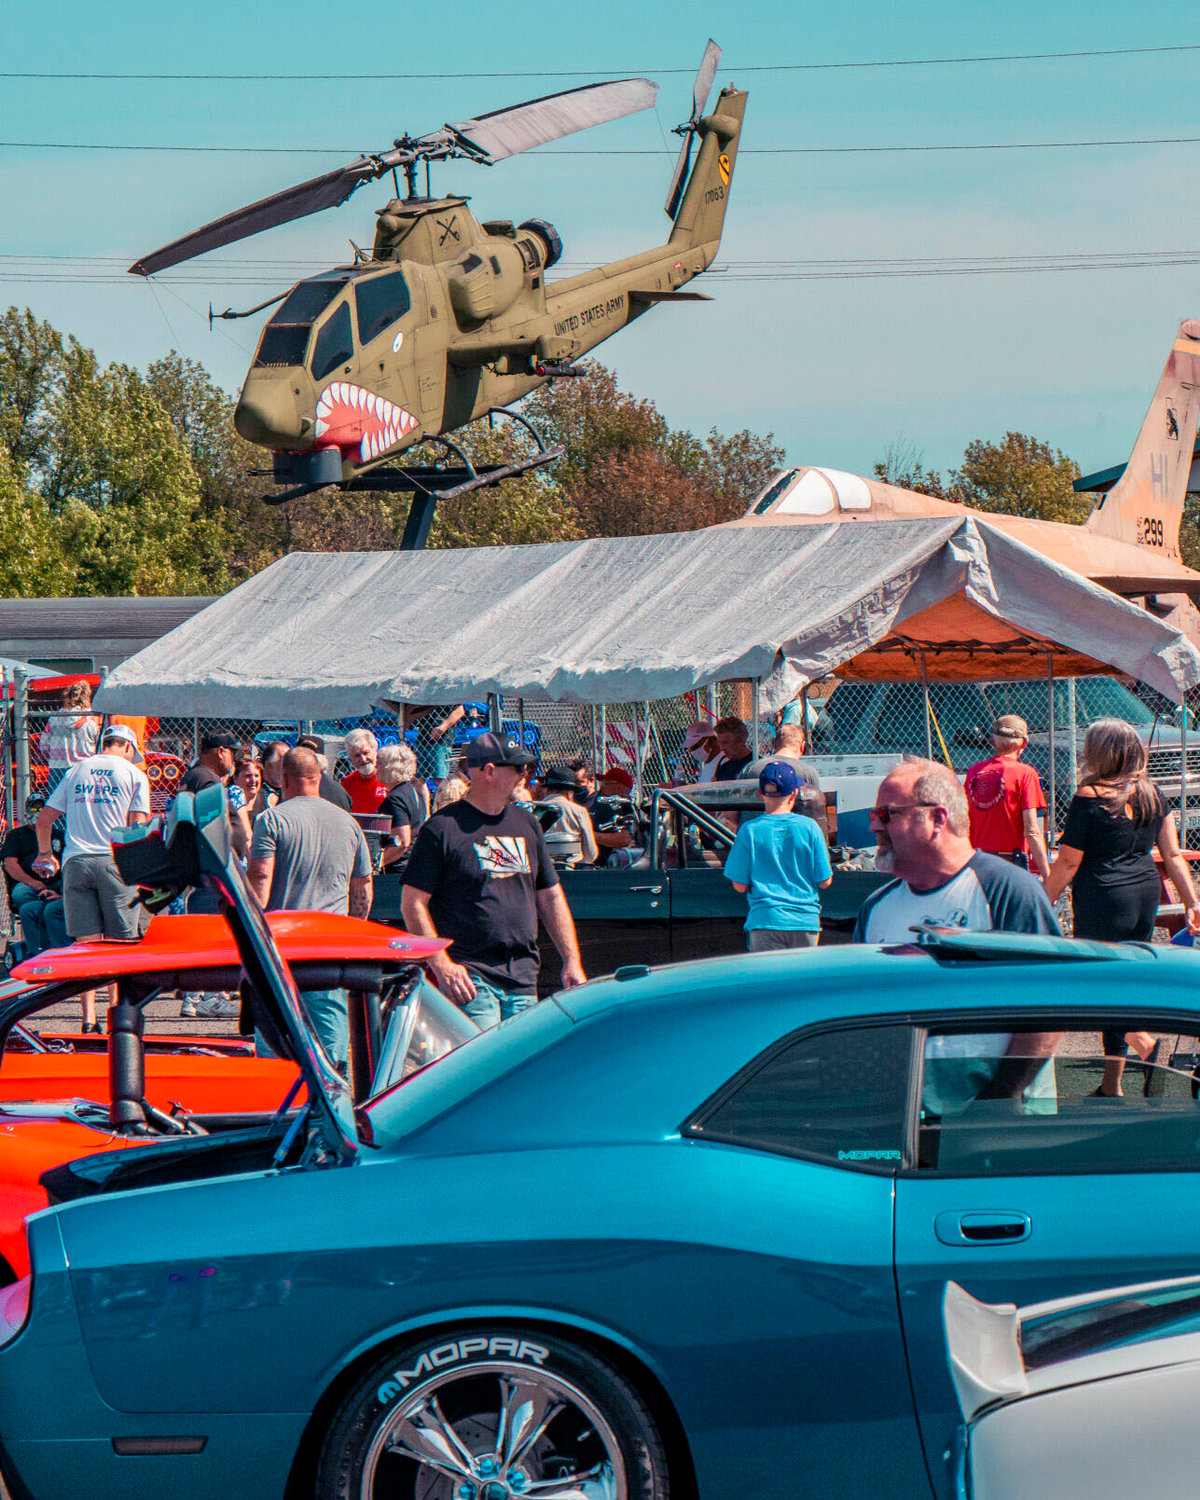 A helicopter display is seen above as attendees look at an array of vehicles during a car show hosted by the Veterans Memorial Museum in August 2020.